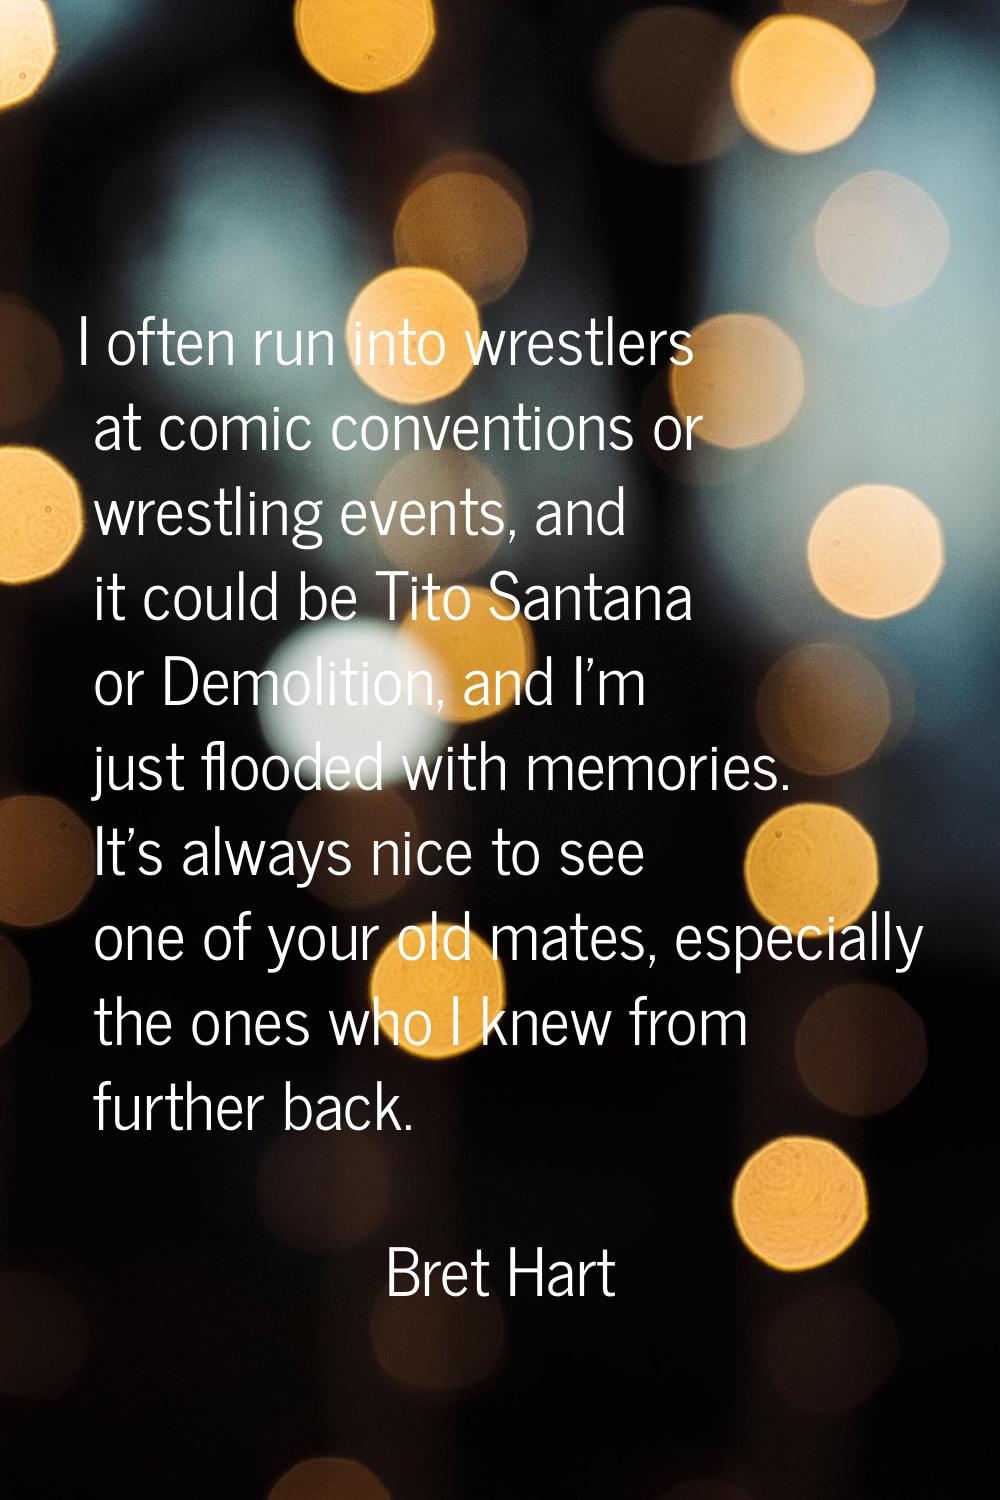 I often run into wrestlers at comic conventions or wrestling events, and it could be Tito Santana o